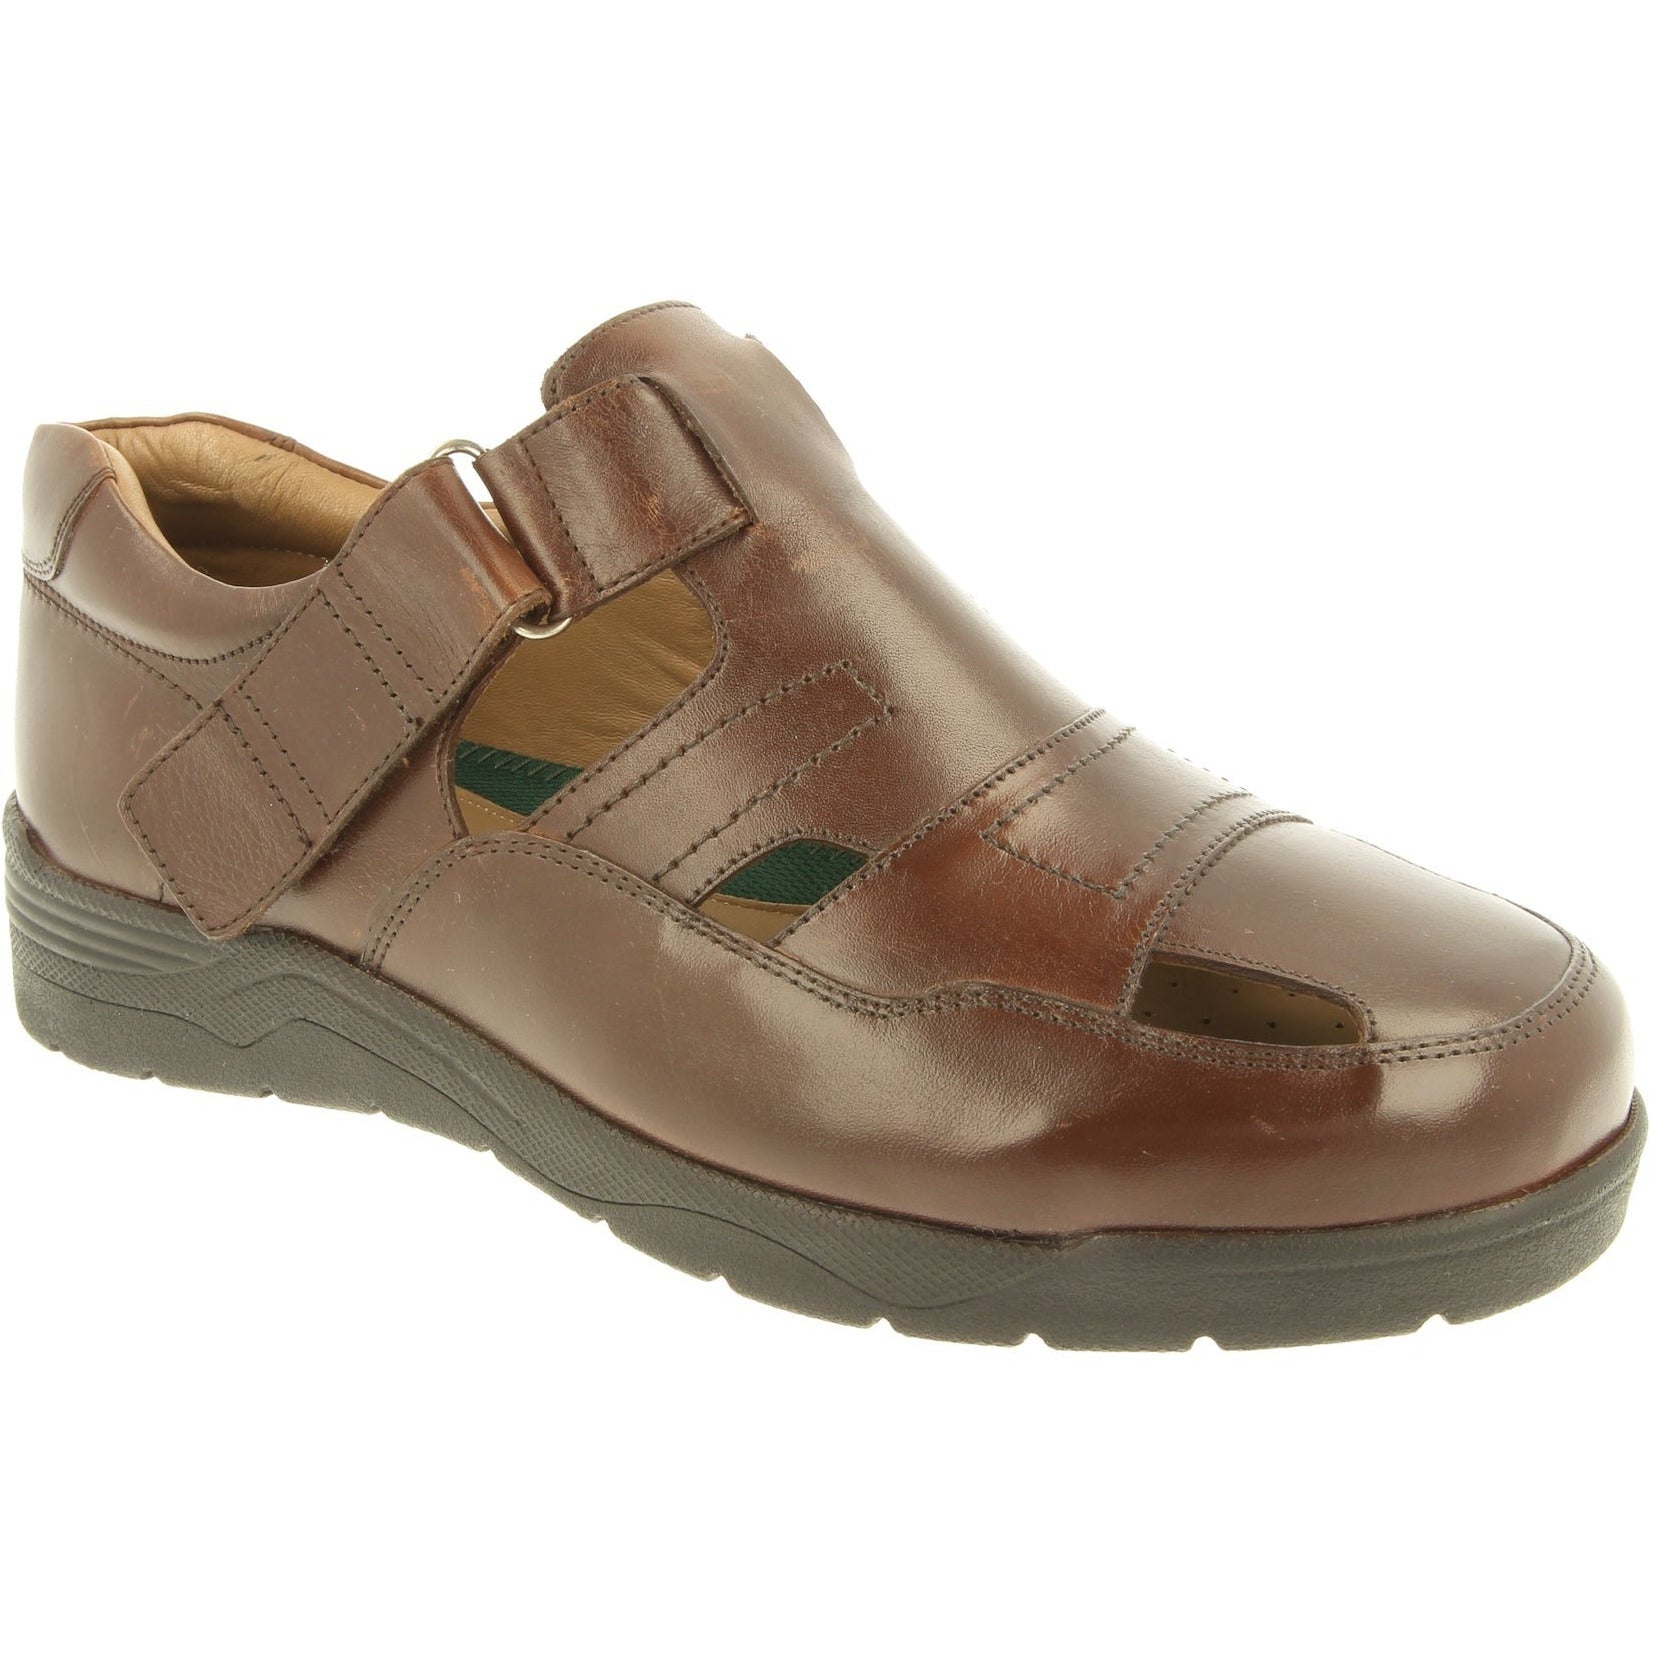 Easy B Barney 2V - Men's Wide Fit Closed Toe Sandal in Brown. Easy B Shoes | Wide Fit Shoes | Personal Shoe Fitting Service | Wisemans | Bantry | West Cork | Munster | Ireland